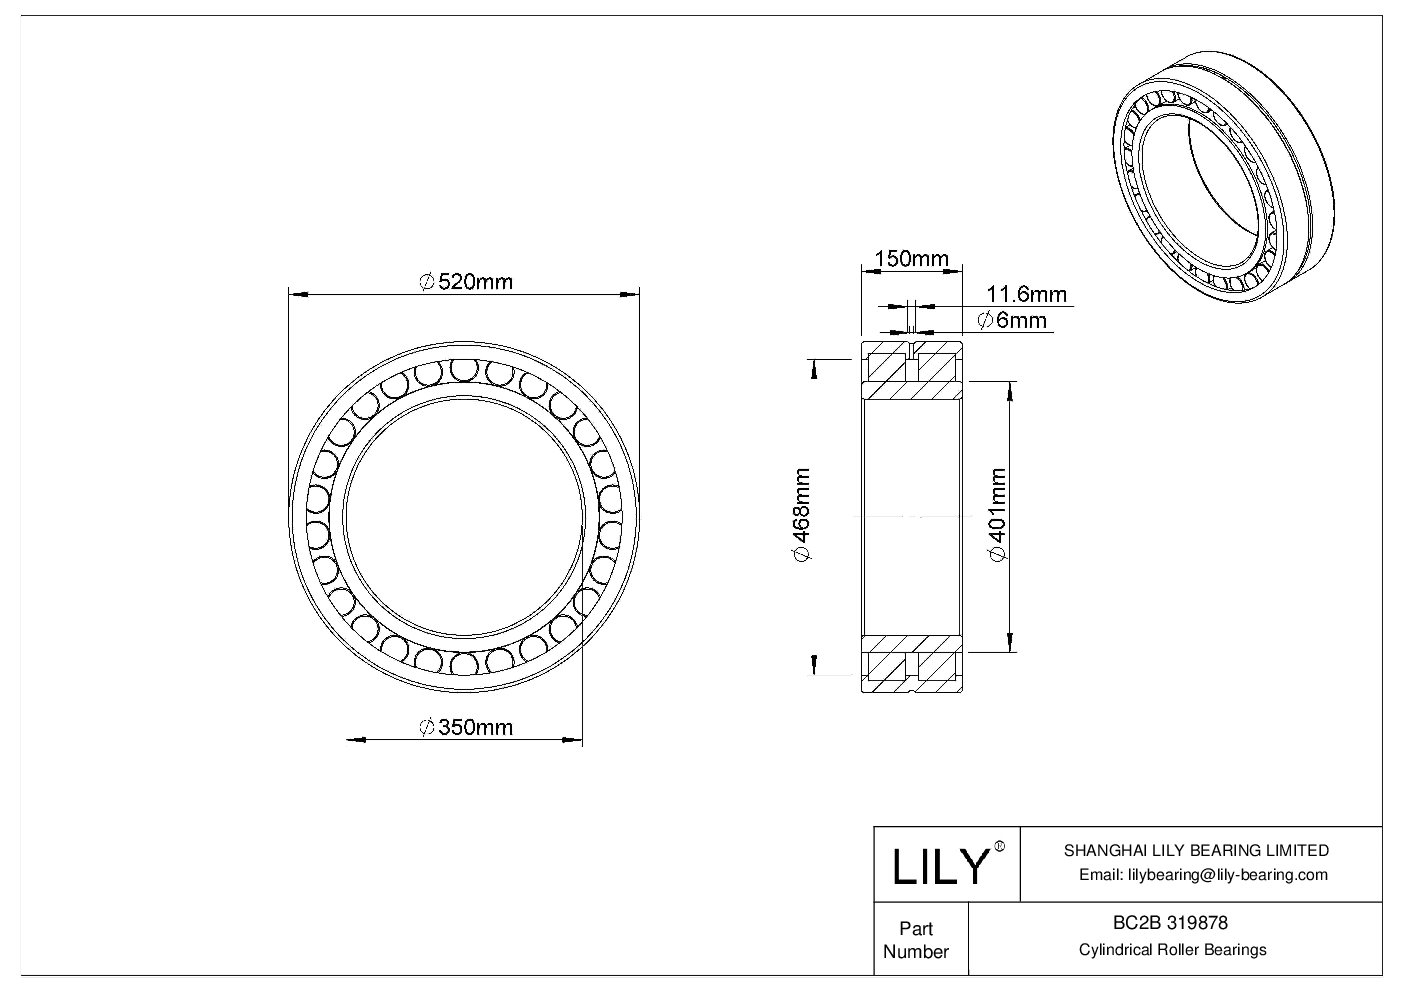 BC2B 319878 Double Row Cylindrical Roller Bearings cad drawing